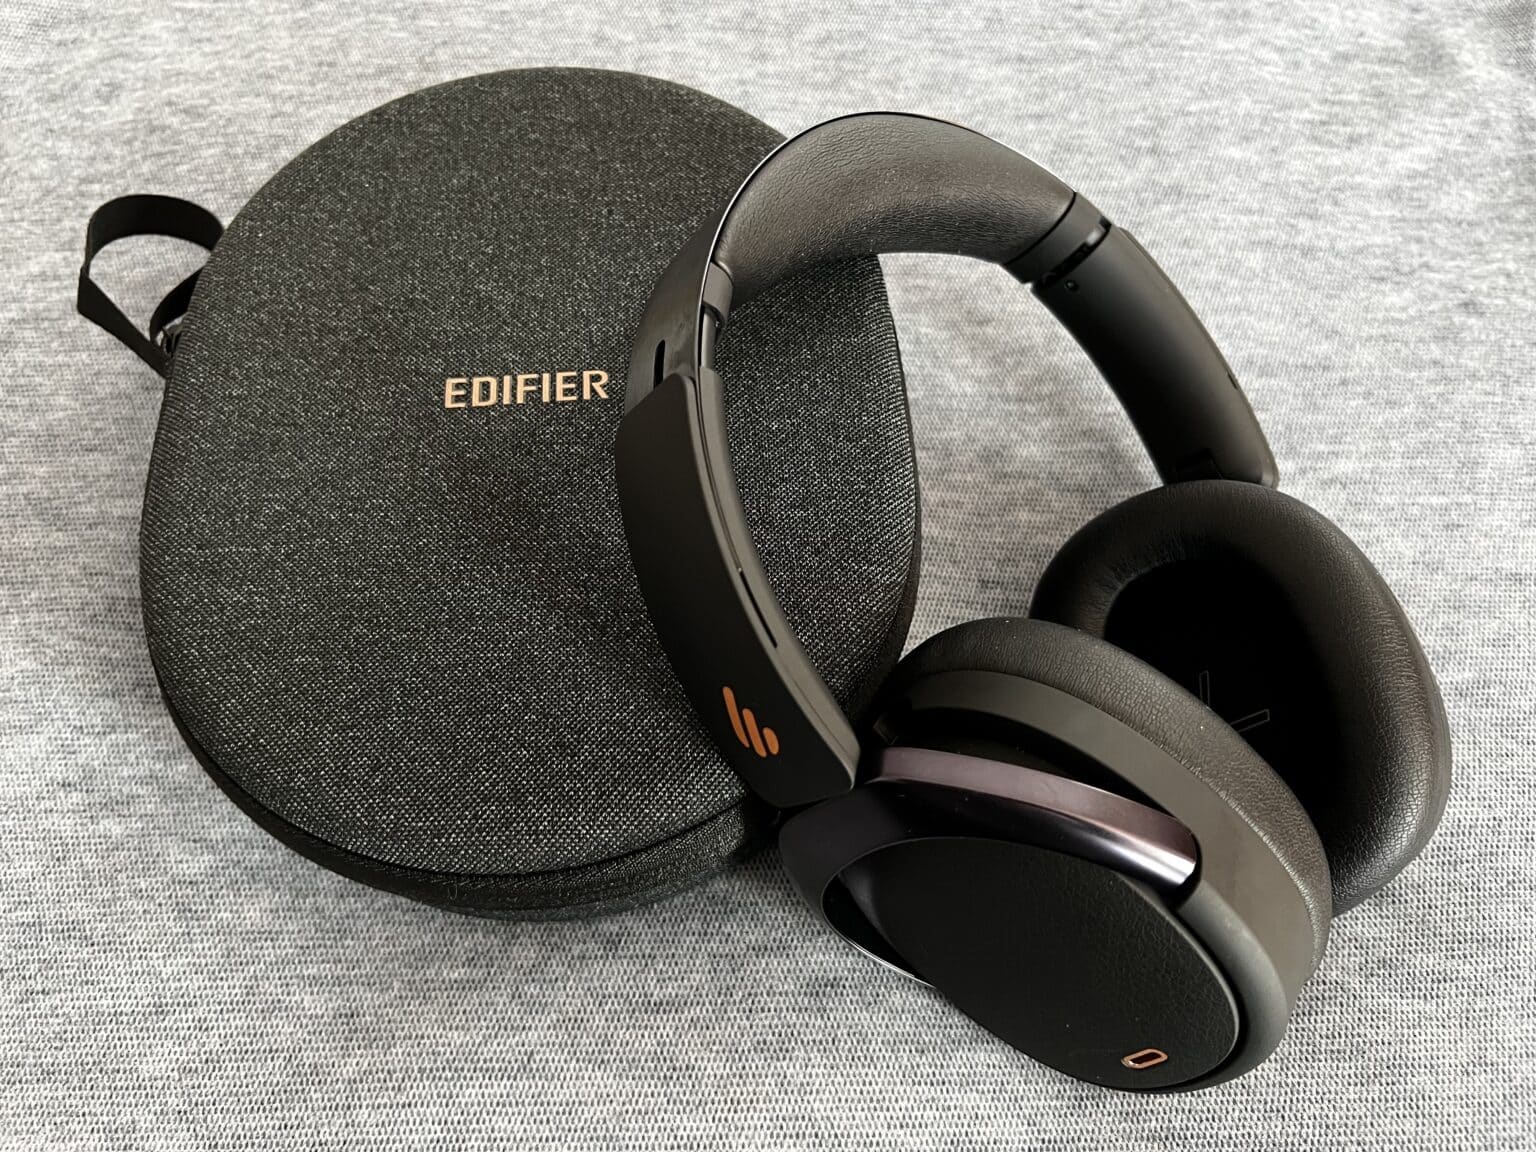 The headphones' folding design helps them fit nicely in the high-quality carrying case.